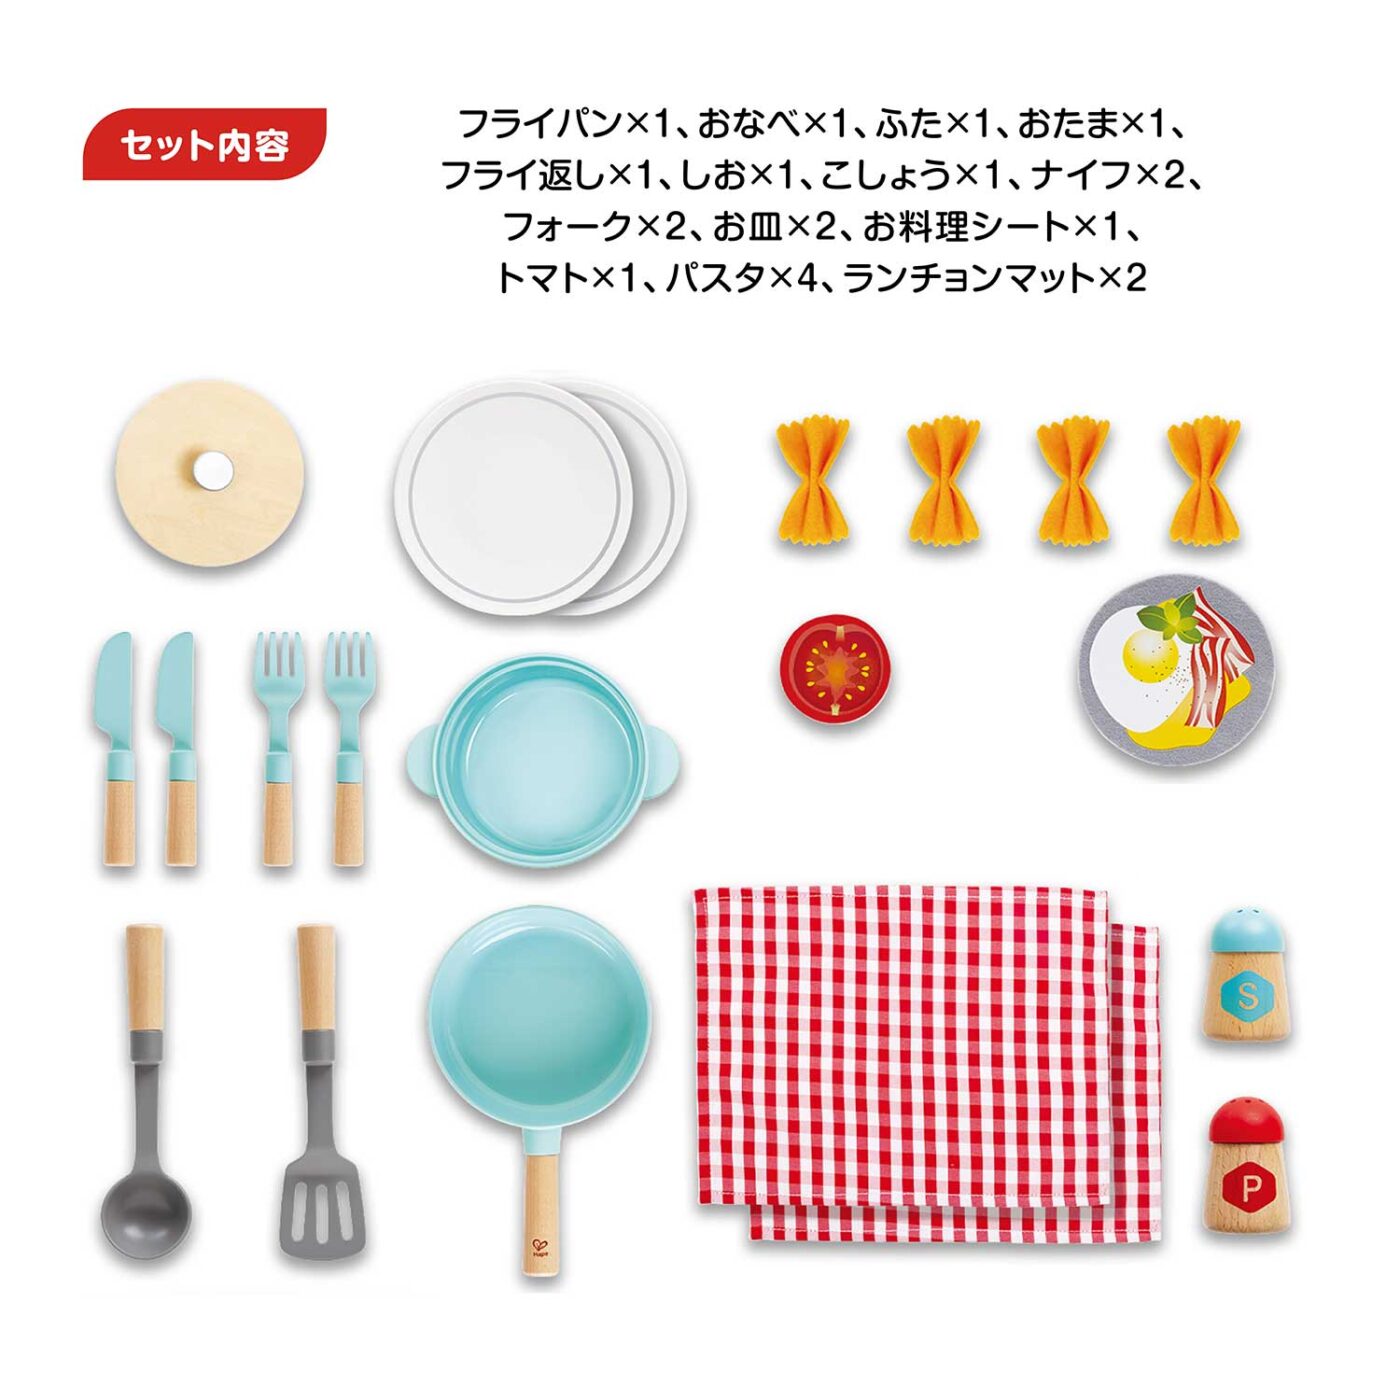 Product image of おままごとクッキングセット5